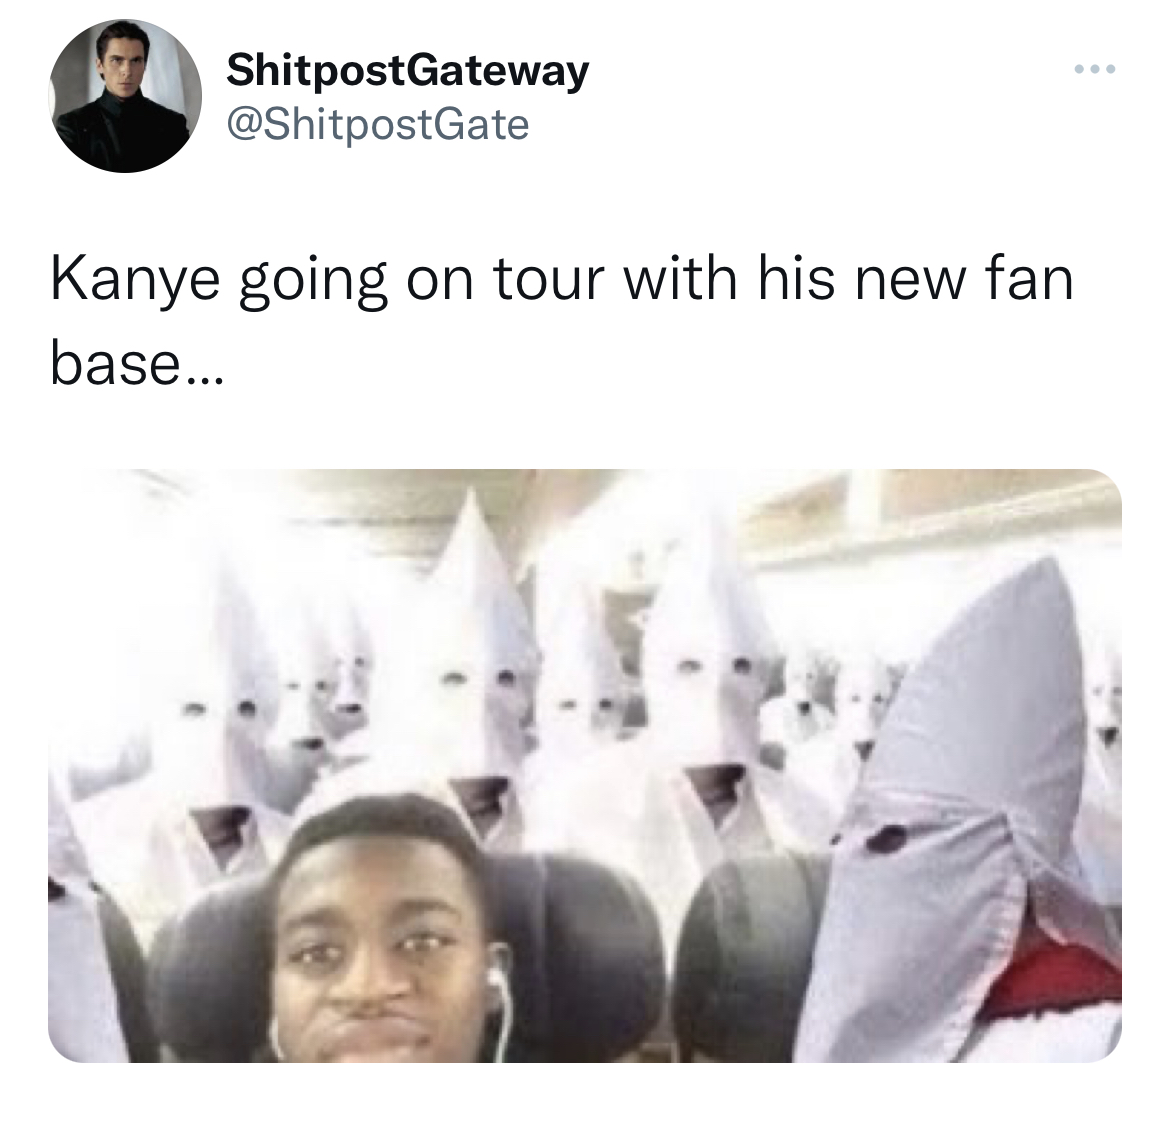 Tweets dunking on celebs - human - ShitpostGateway Kanye going on tour with his new fan base...